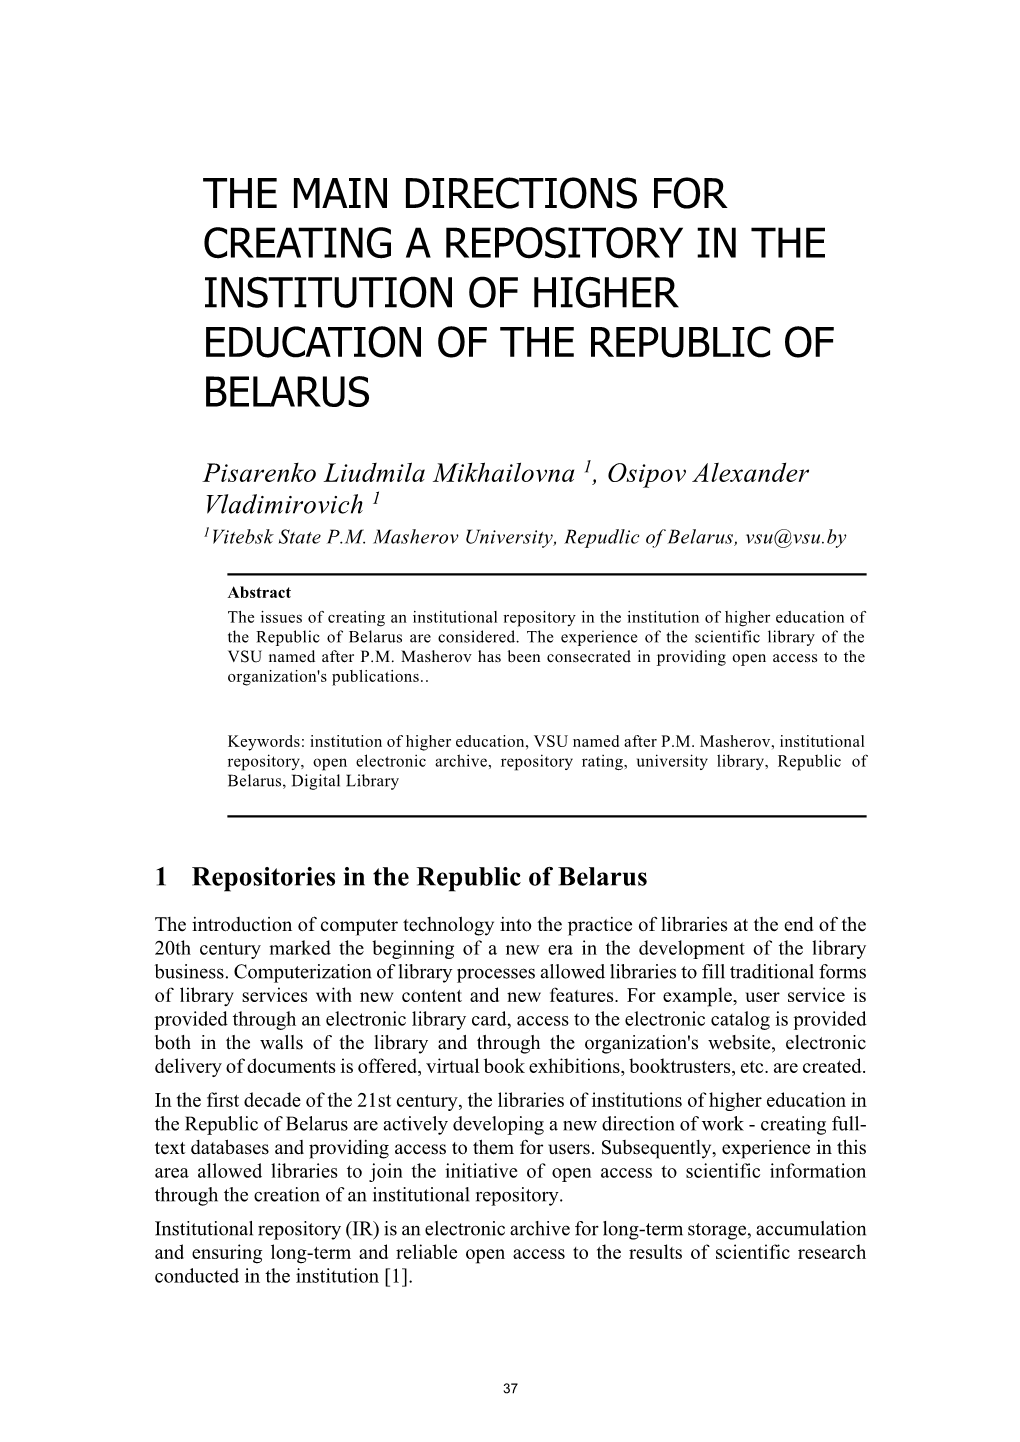 The Main Directions for Creating a Repository in the Institution of Higher Education of the Republic of Belarus